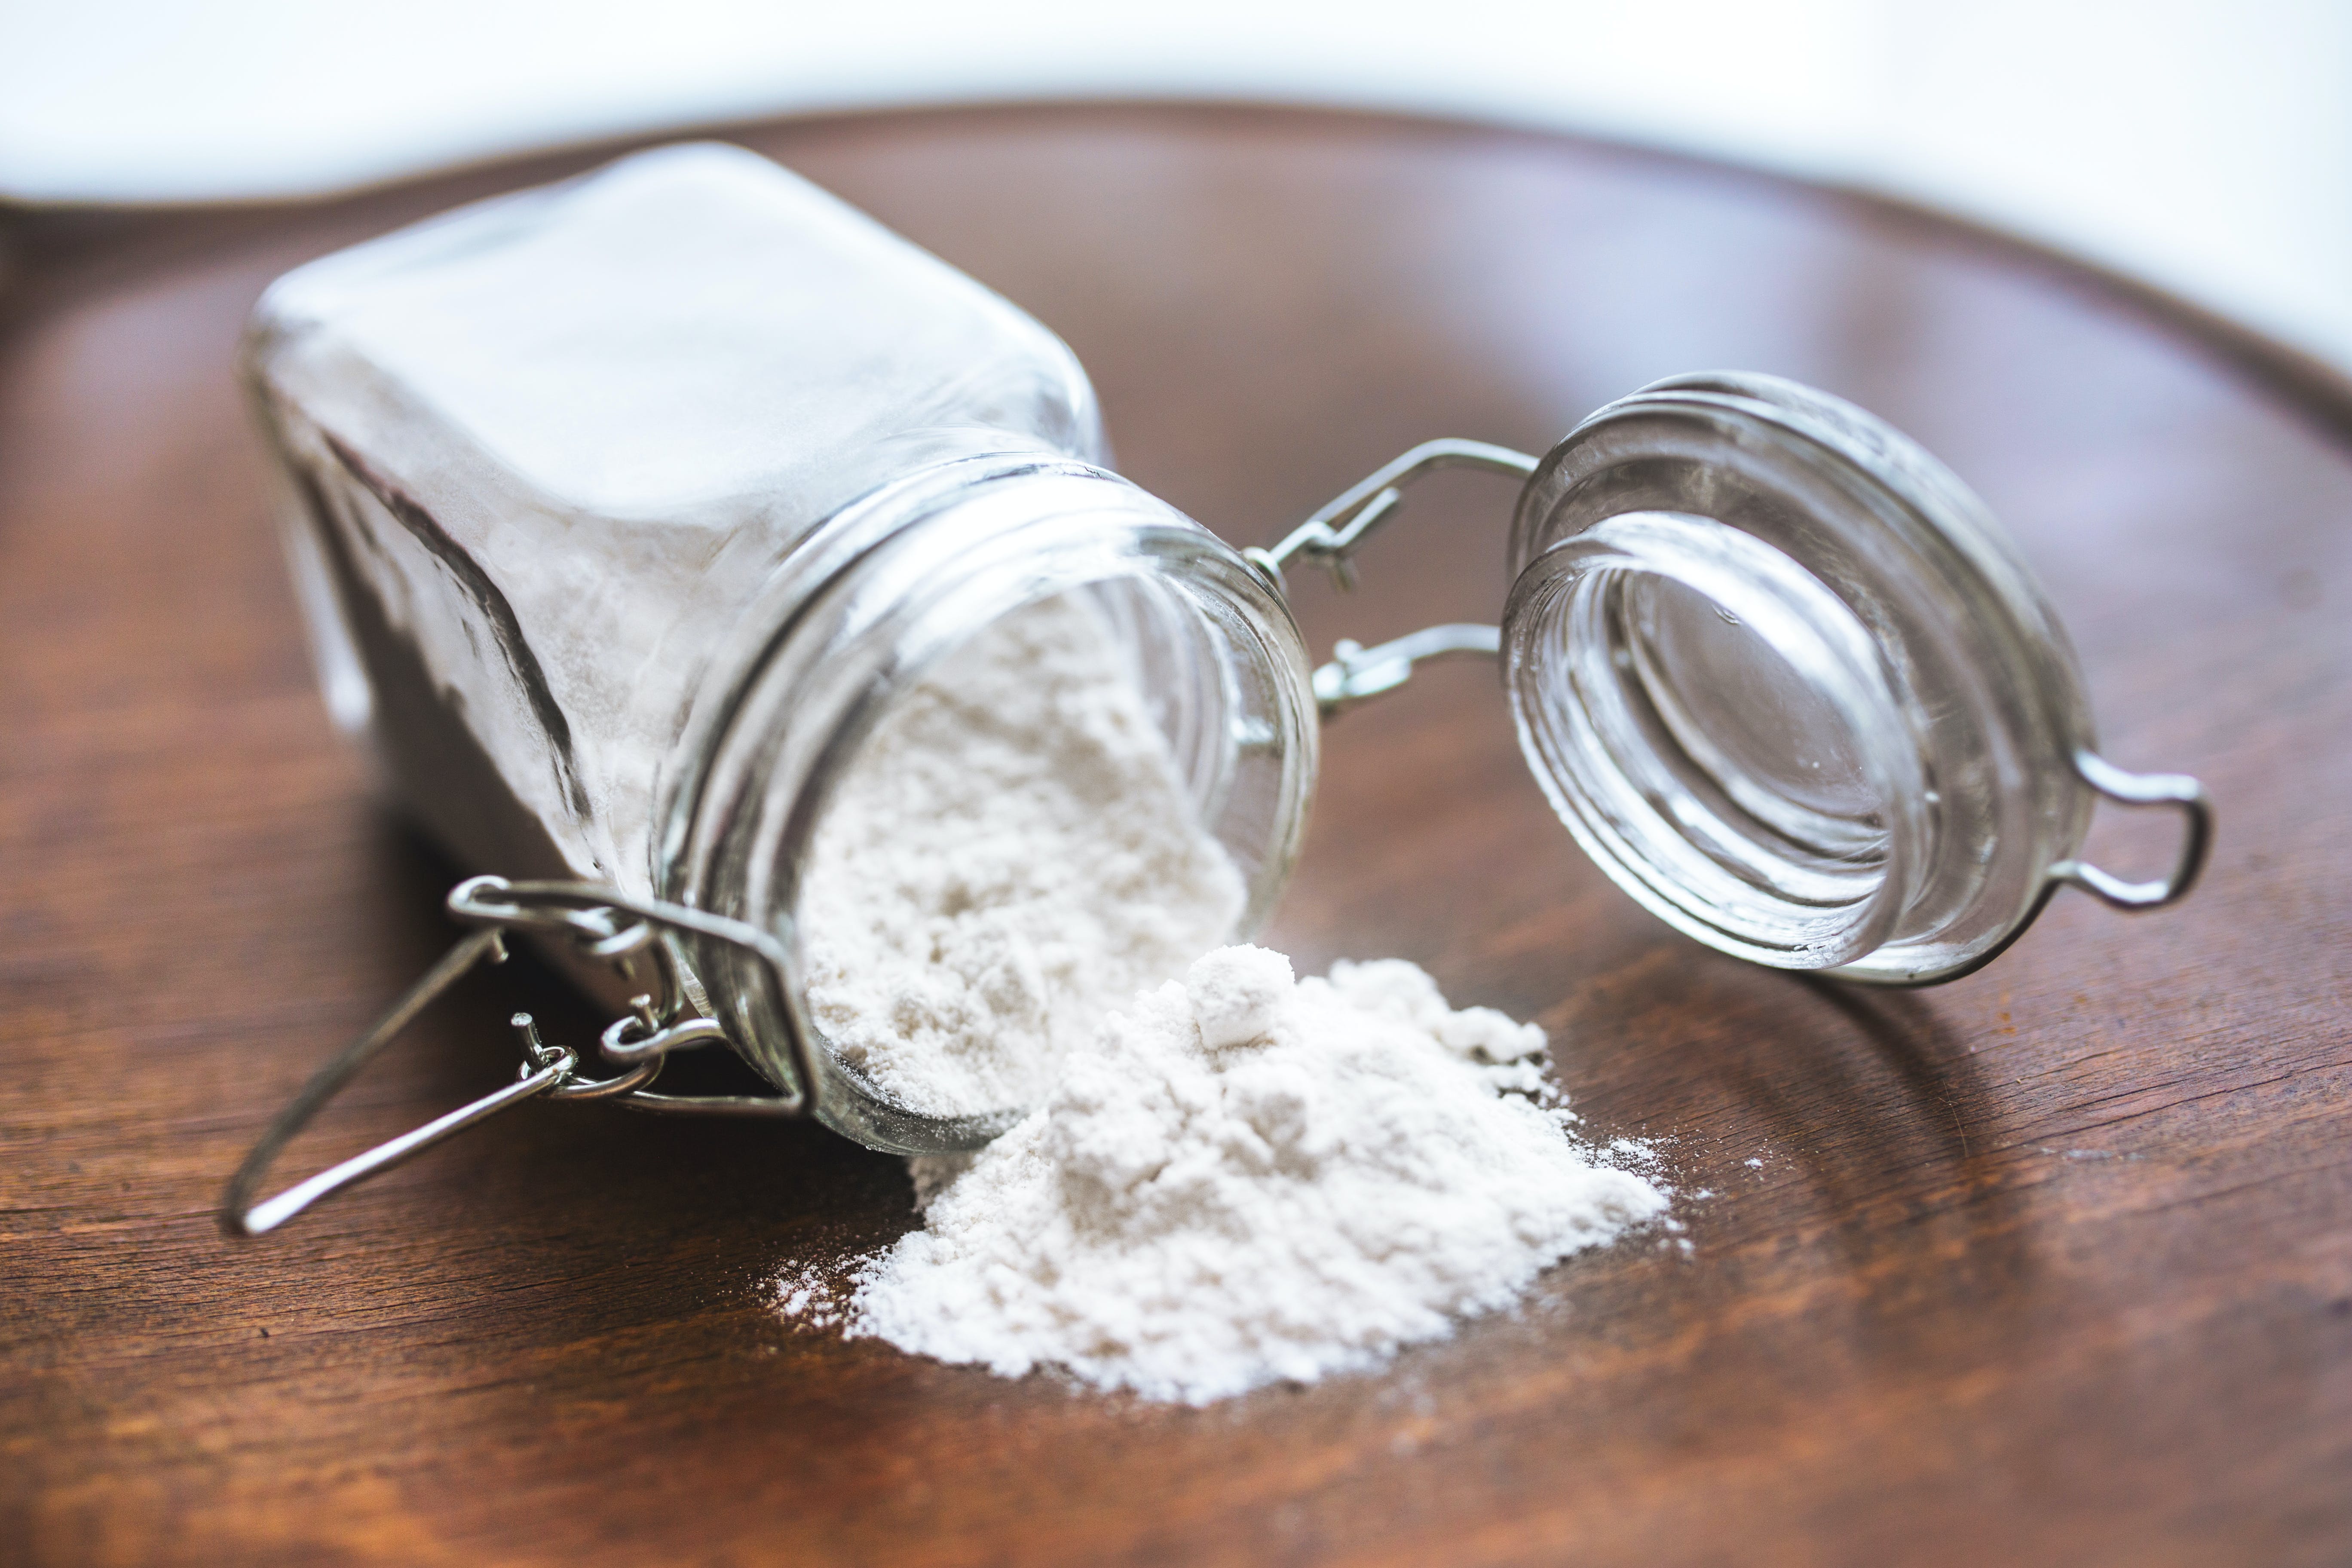 Create a paste with baking soda, water, and a bit of laundry detergent, and apply it to the affected spots. | Source: Pexels